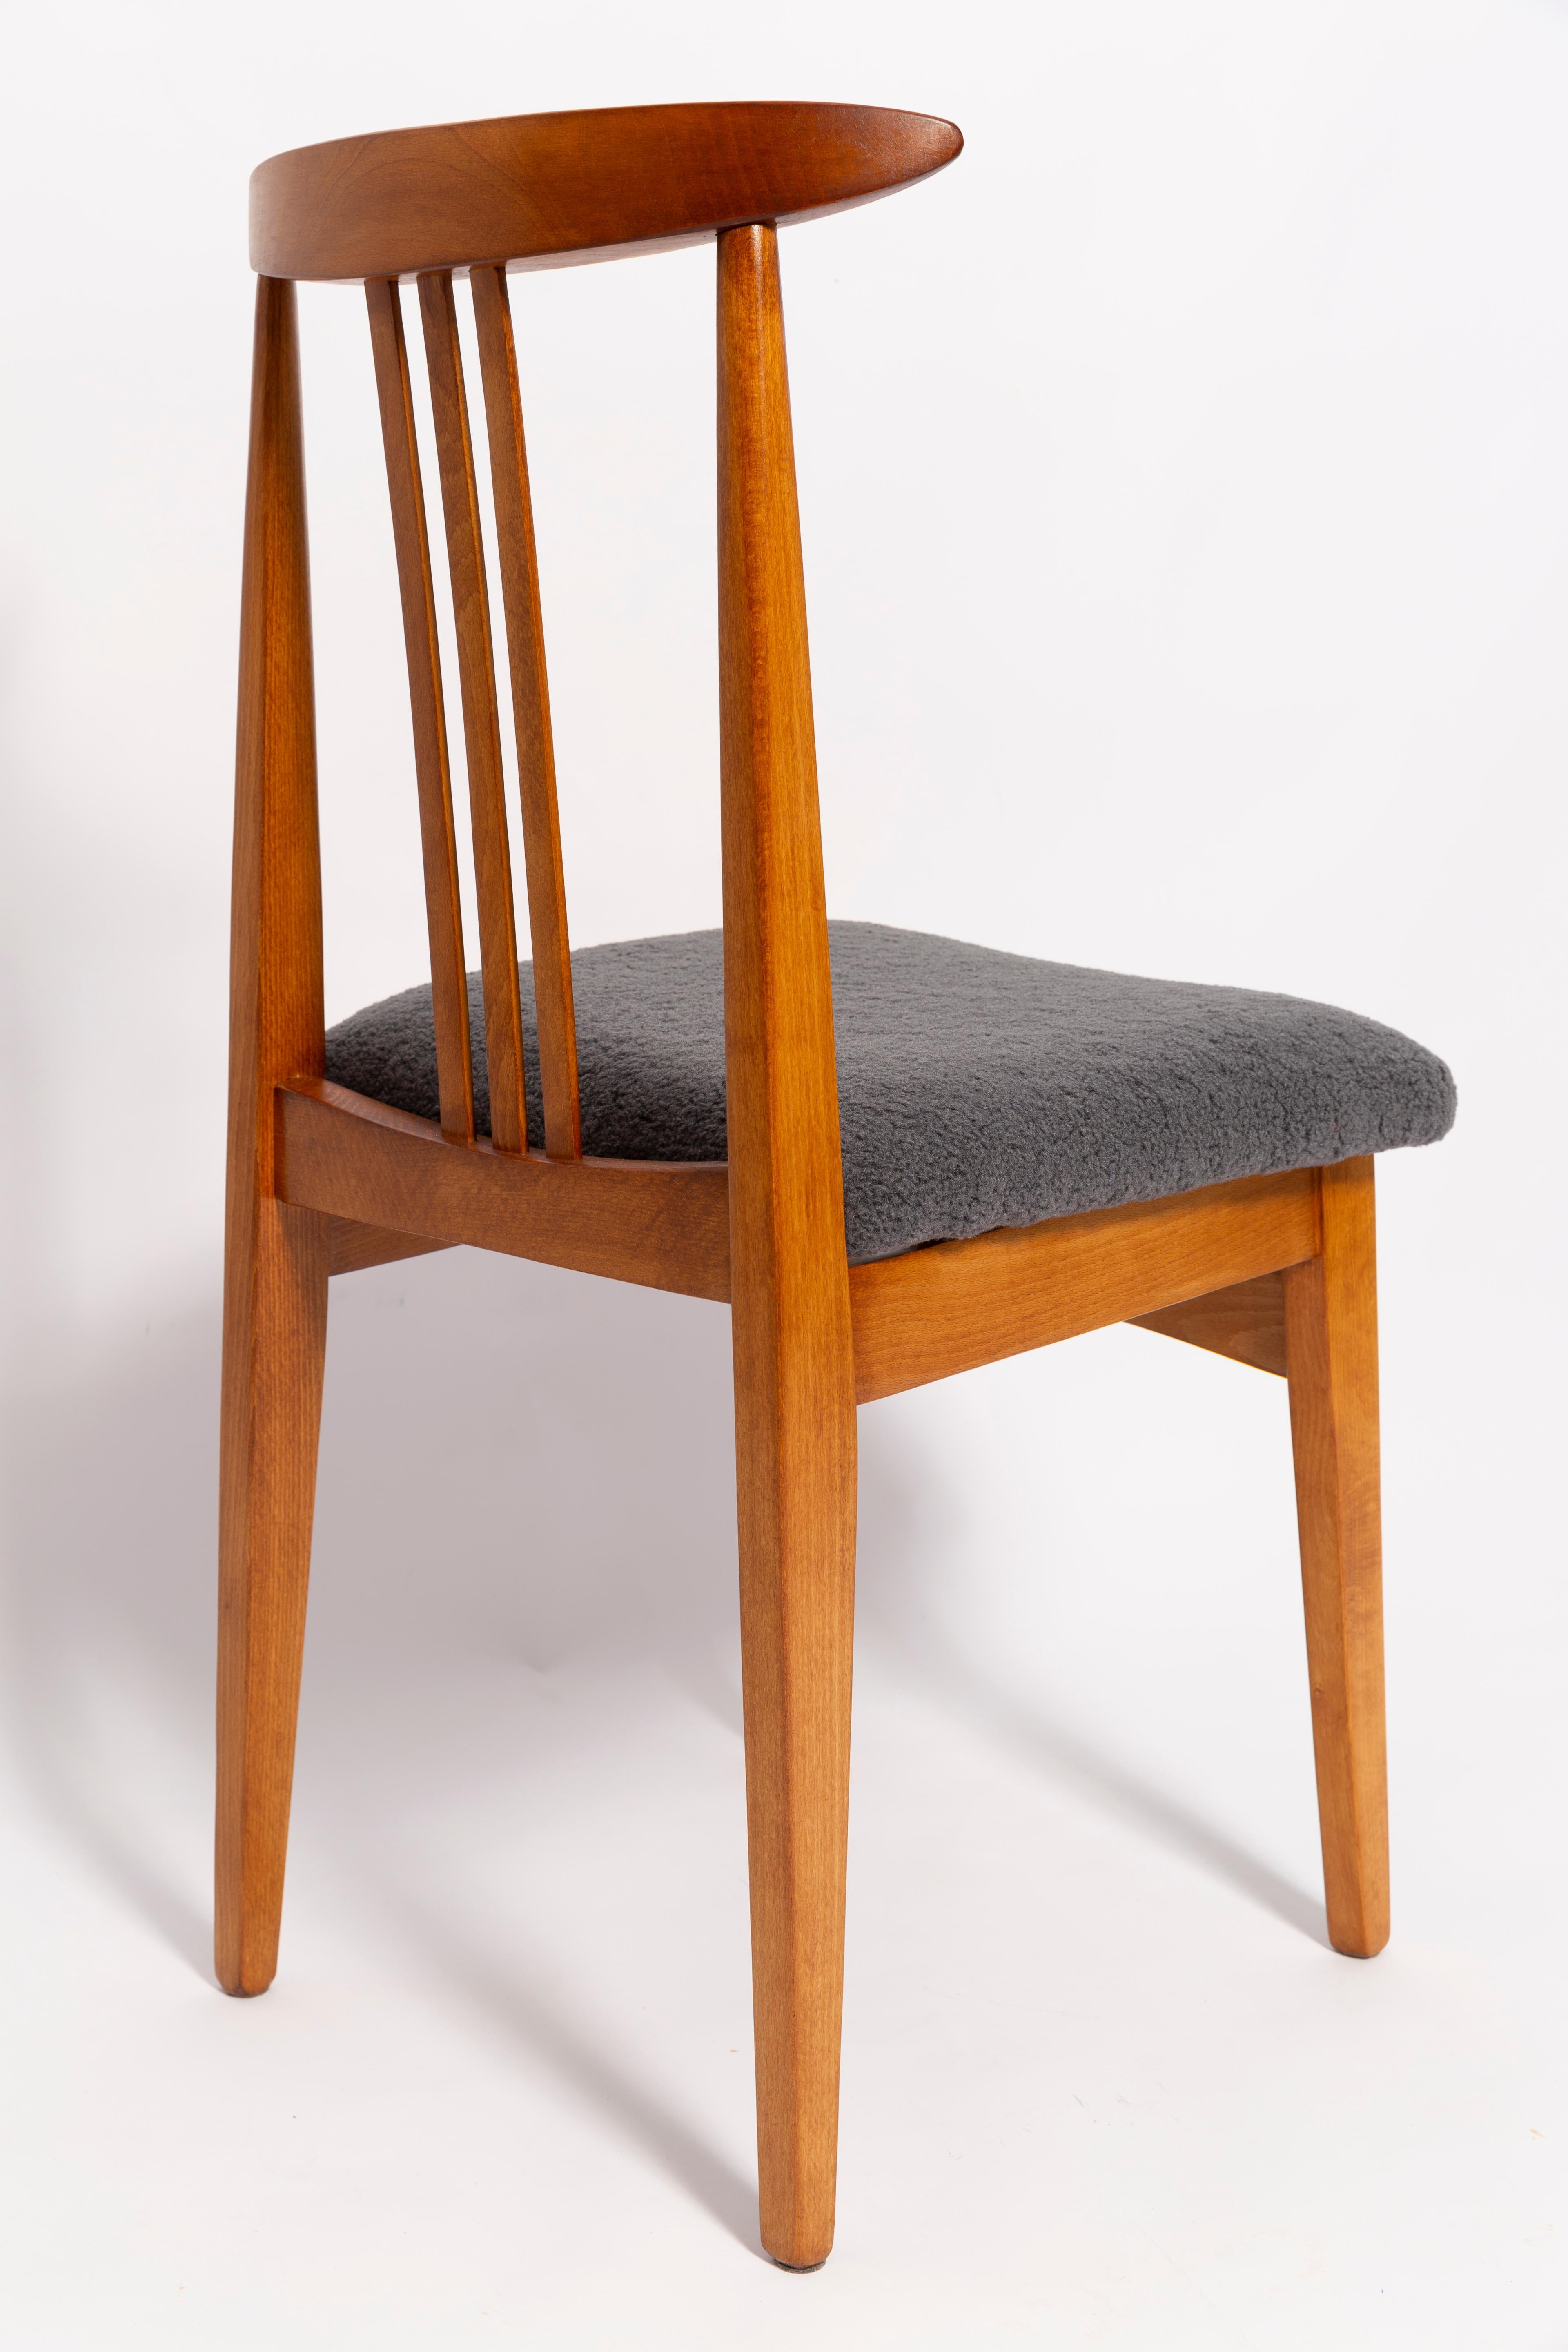 Hand-Crafted Mid-Century Graphite Gray Boucle Chair, Medium Wood, M. Zielinski, Europe, 1960 For Sale